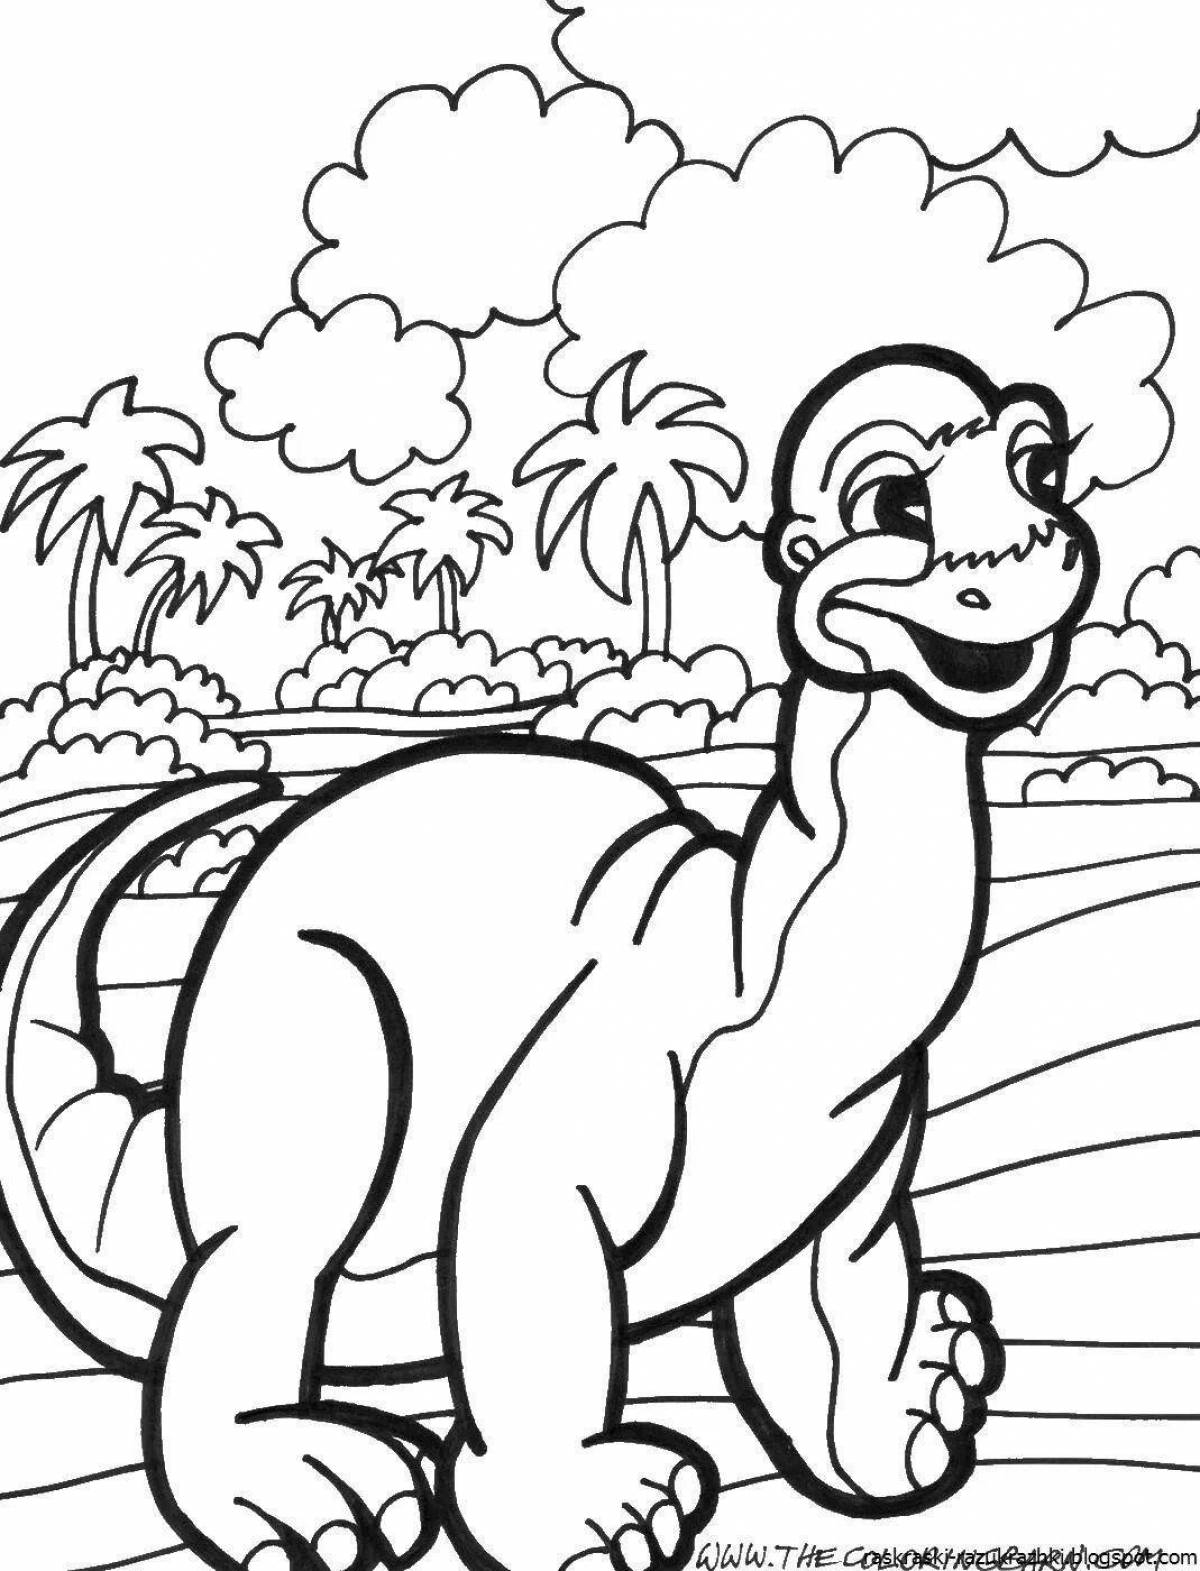 Humorous dinosaur coloring book for 7 year olds